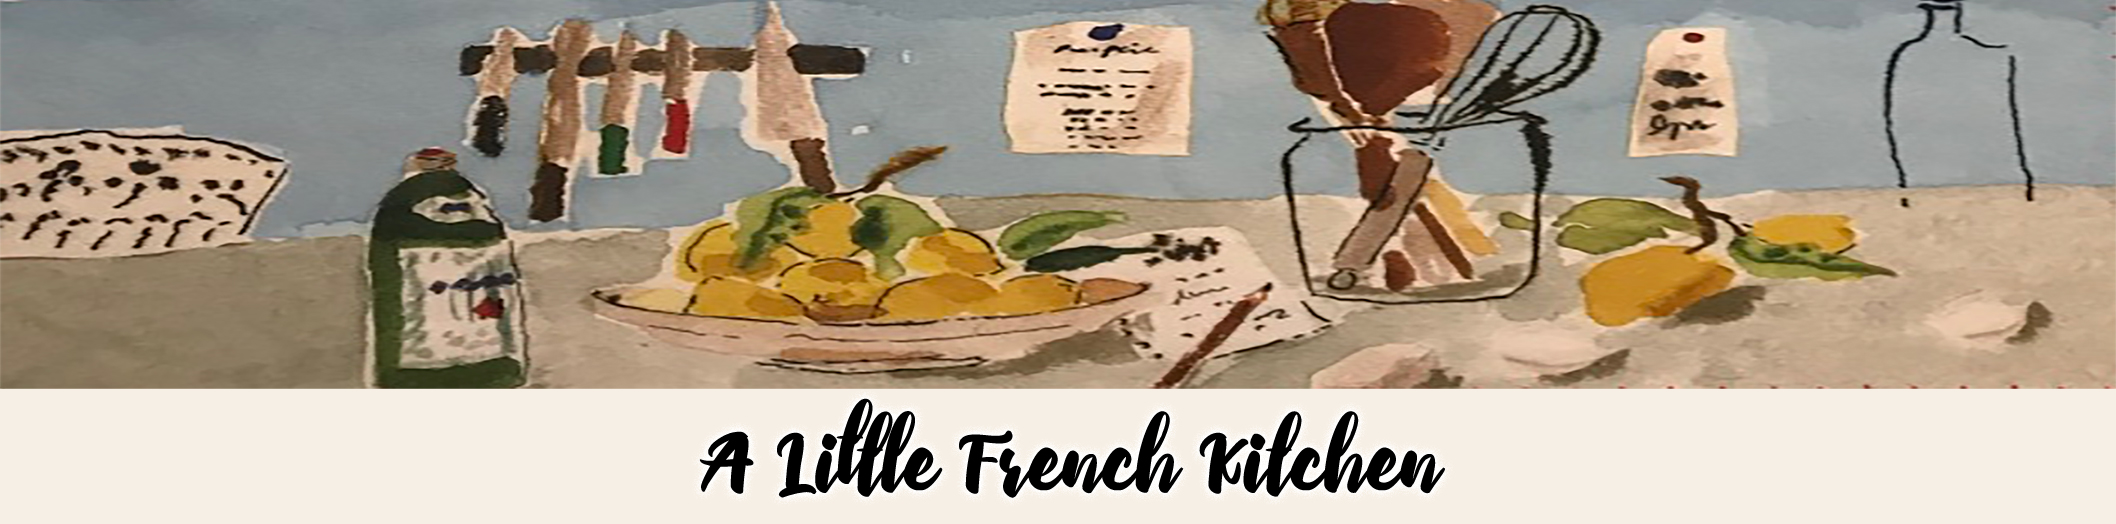 A Little French Kitchen